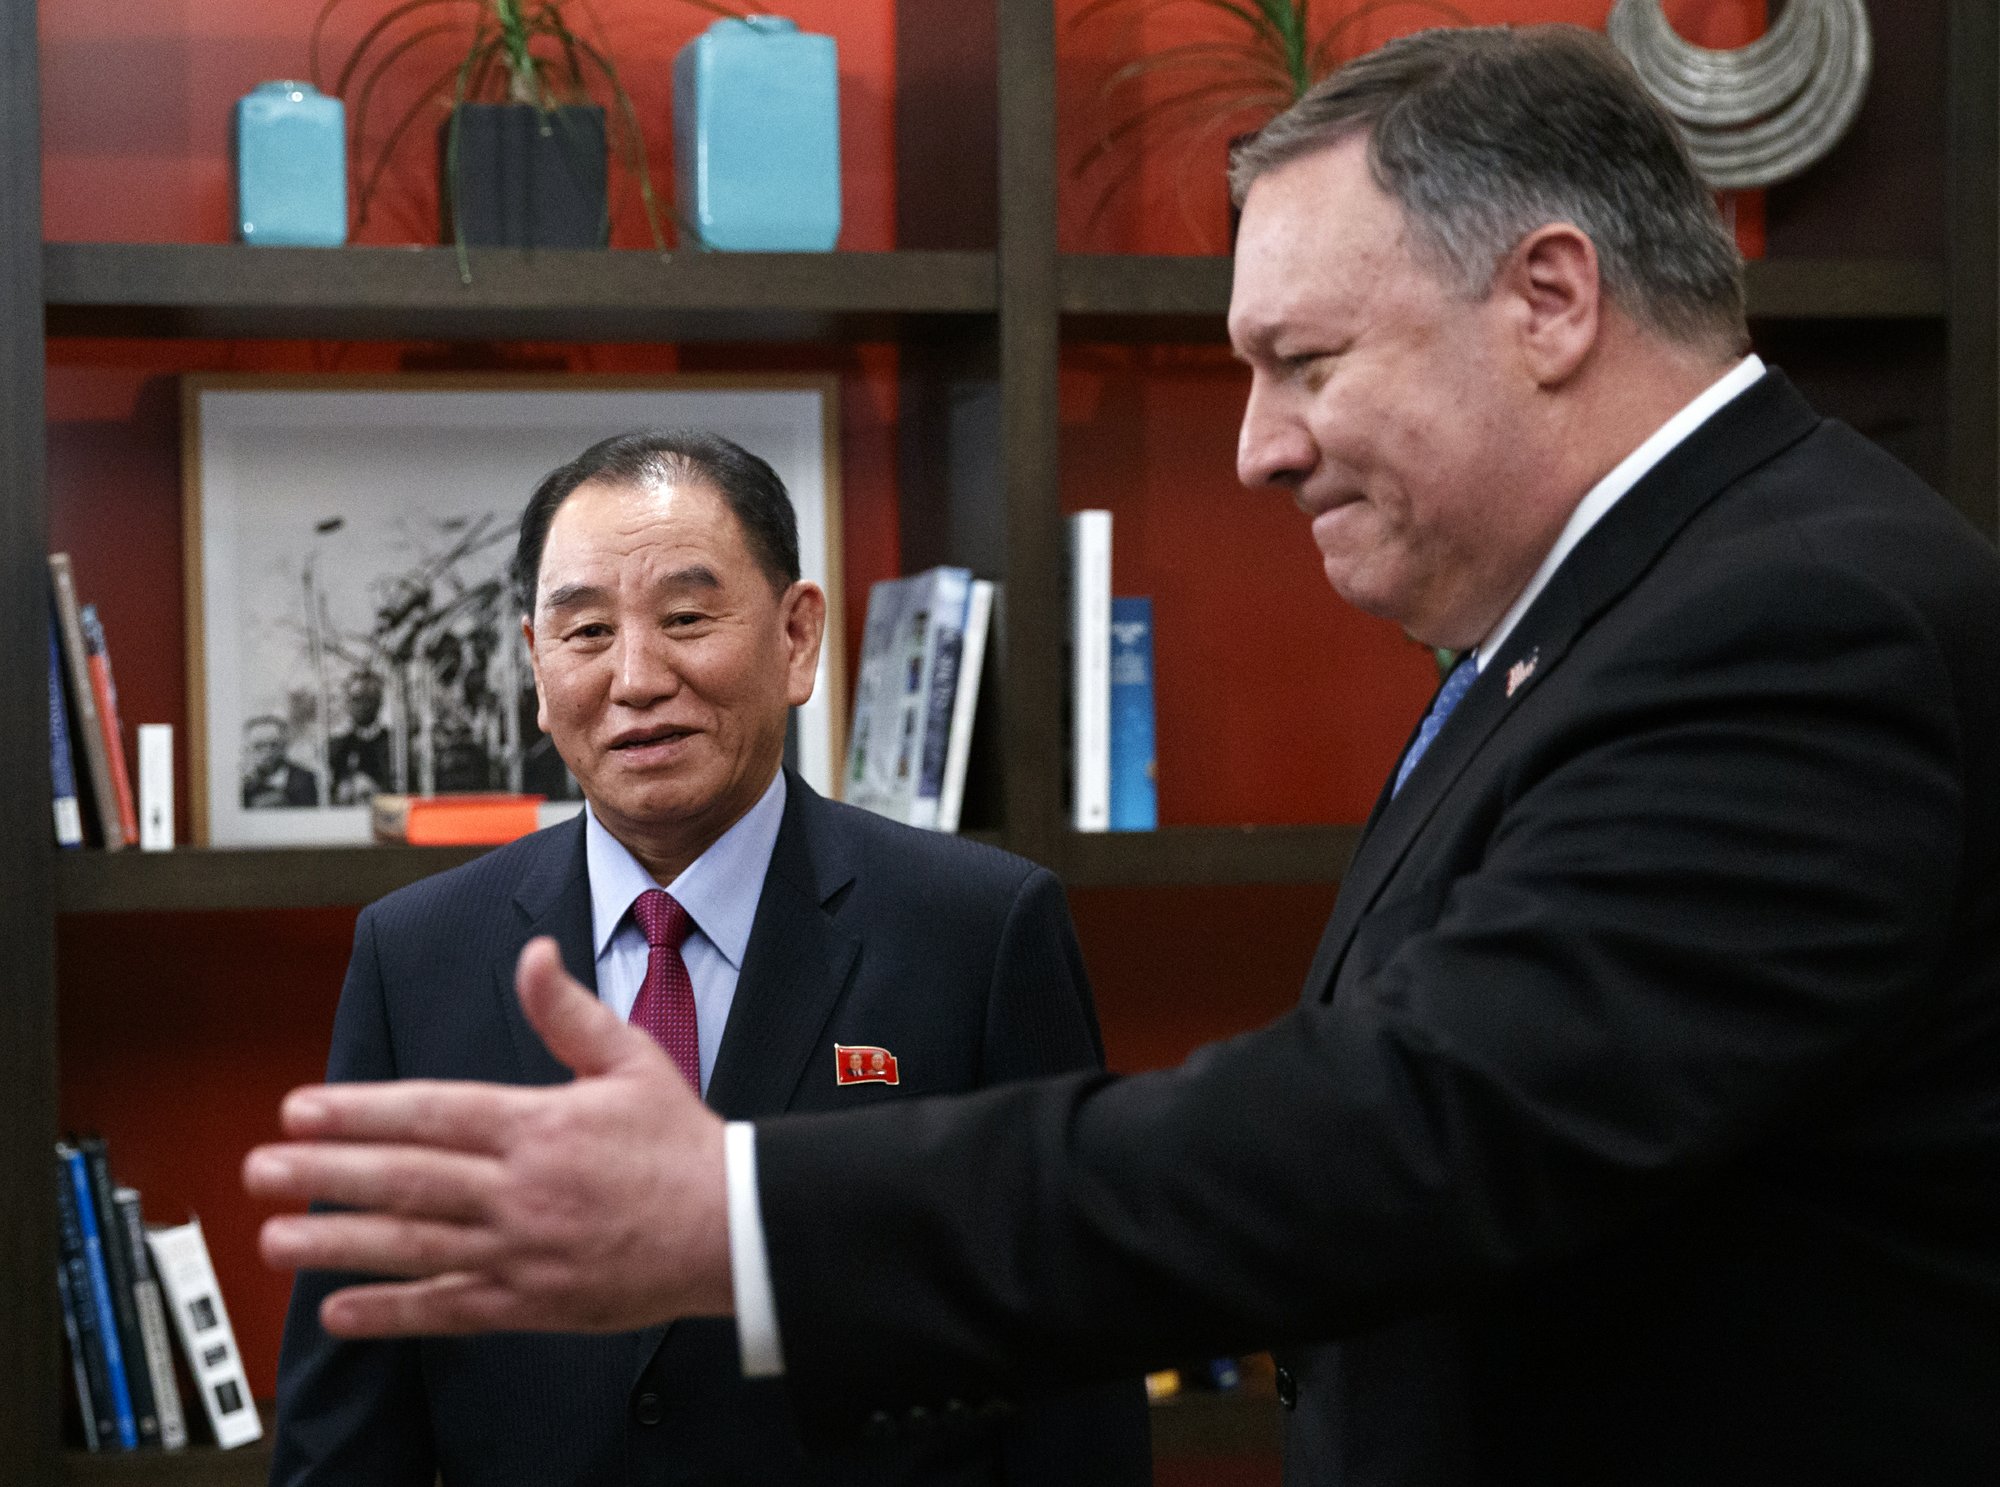 Secretary of State Mike Pompeo, right, and Kim Yong Chol, a North Korean senior ruling party official and former intelligence chief, walk from a photo opportunity at the The Dupont Circle Hotel in Washington, on Friday, Jan. 18, 2019. Photo: AP